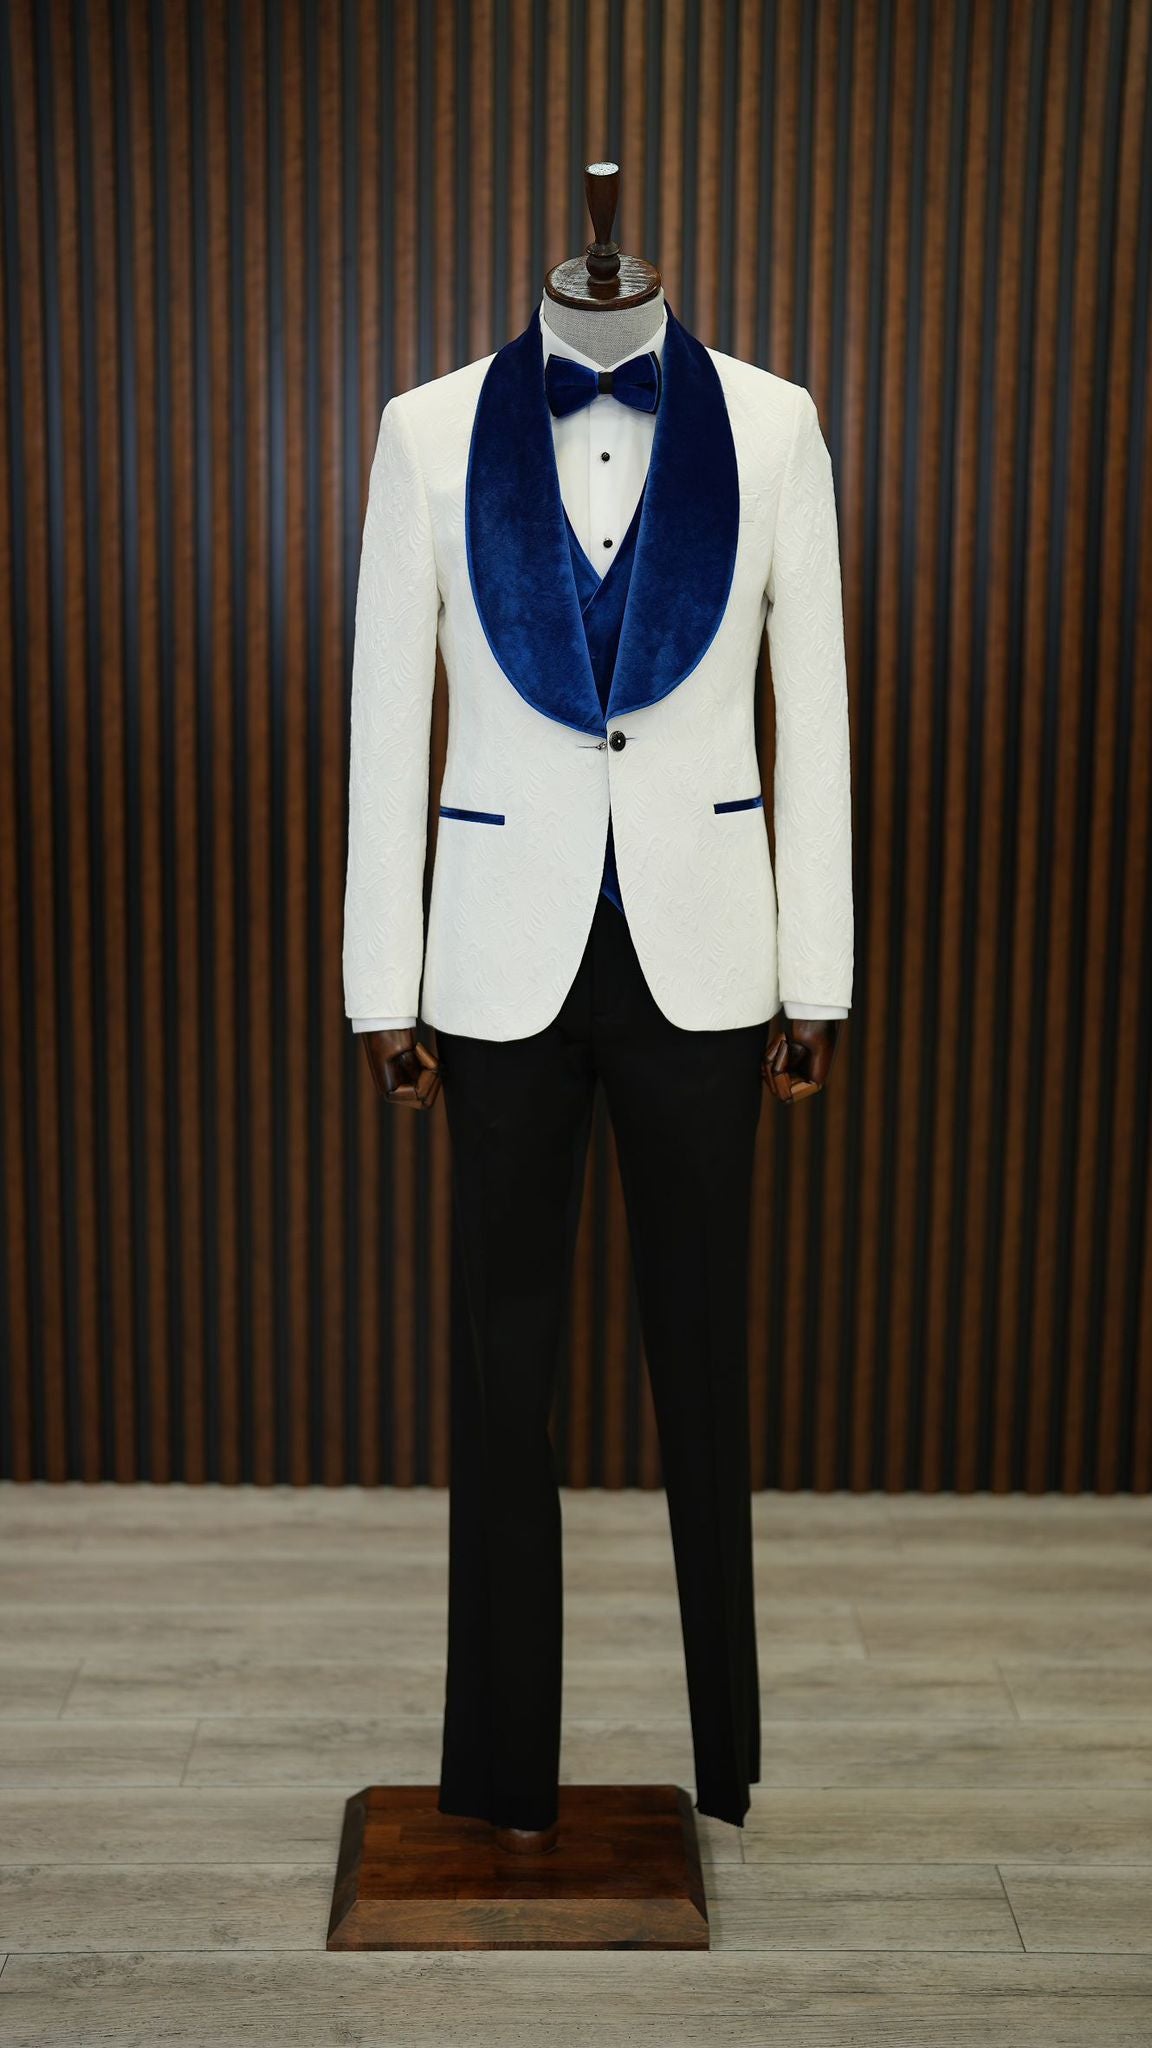 A Blue and White Tuxedo Suit on display.